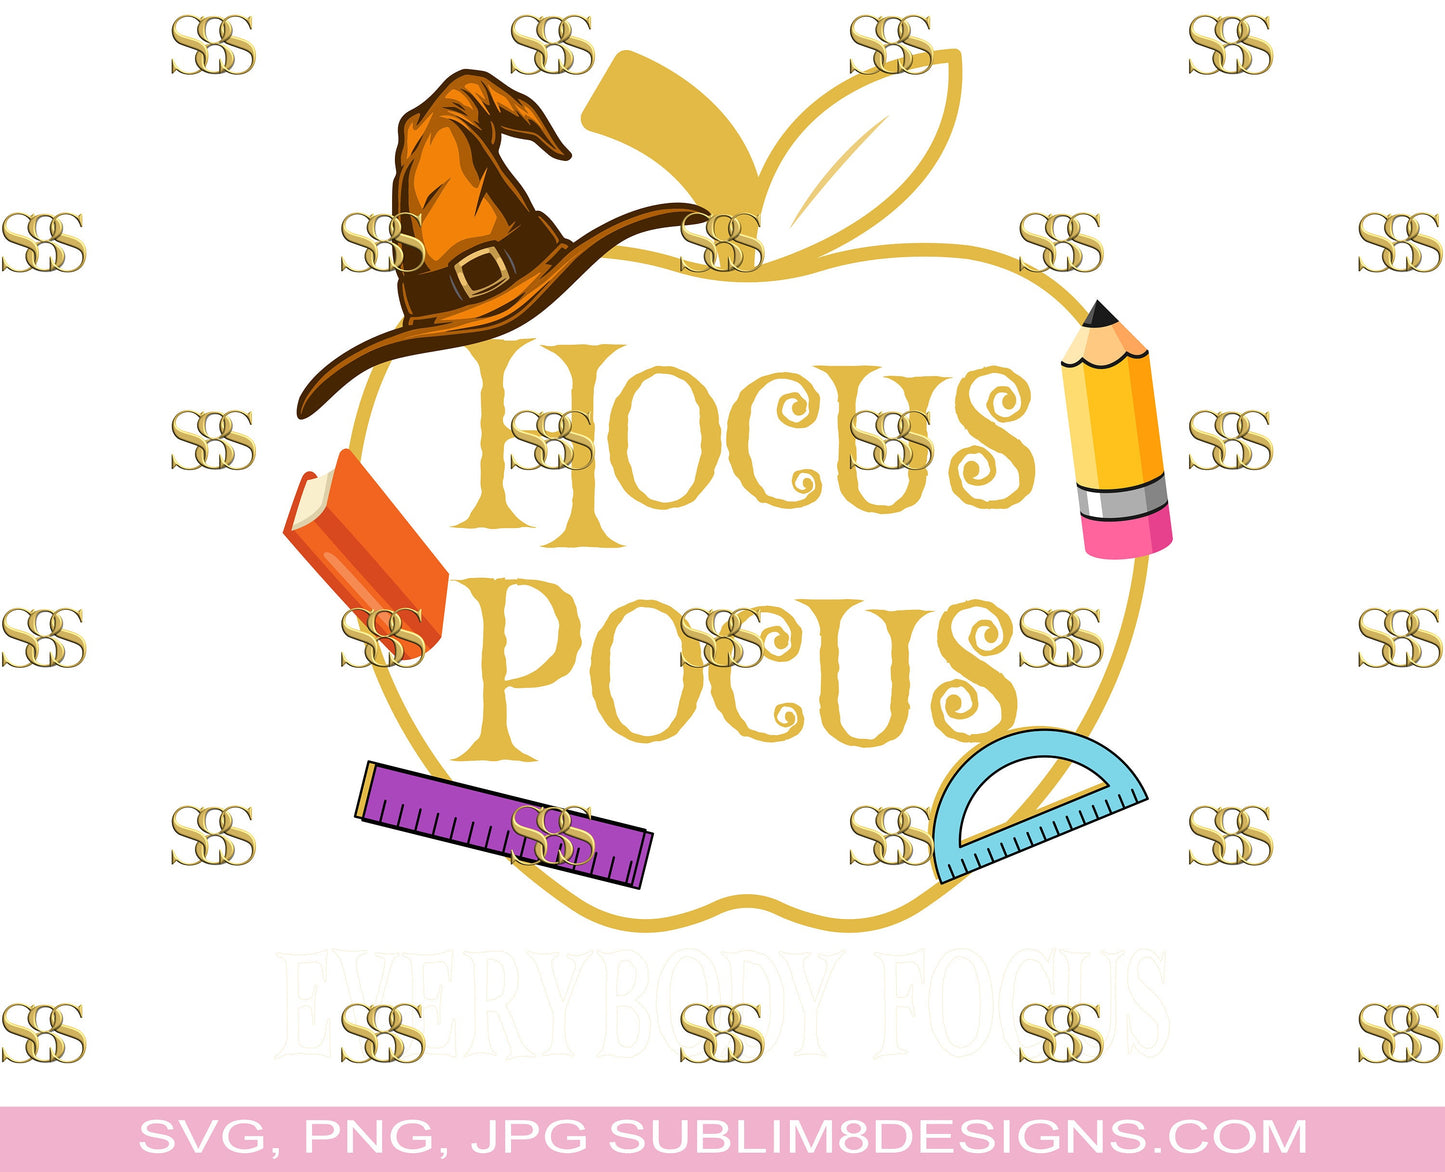 Hocus Pocus Everybody Focus SVG and PNG ONLY